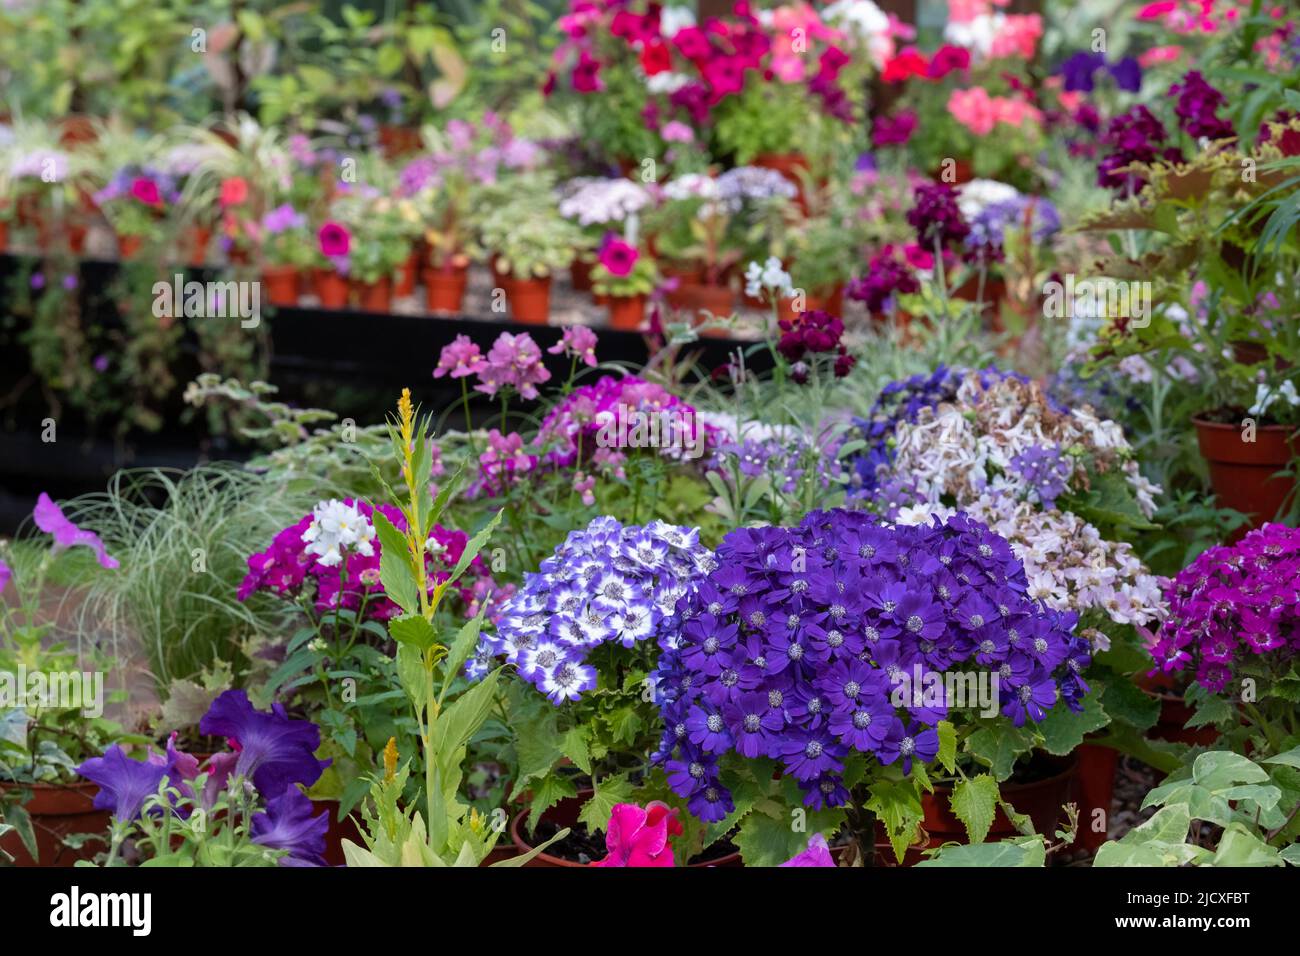 Flowering plants including petunias, phlox and pericallis cruenta, in the Palm House and Main Range of glasshouses in the Glasgow Botanic Garden, UK. Stock Photo